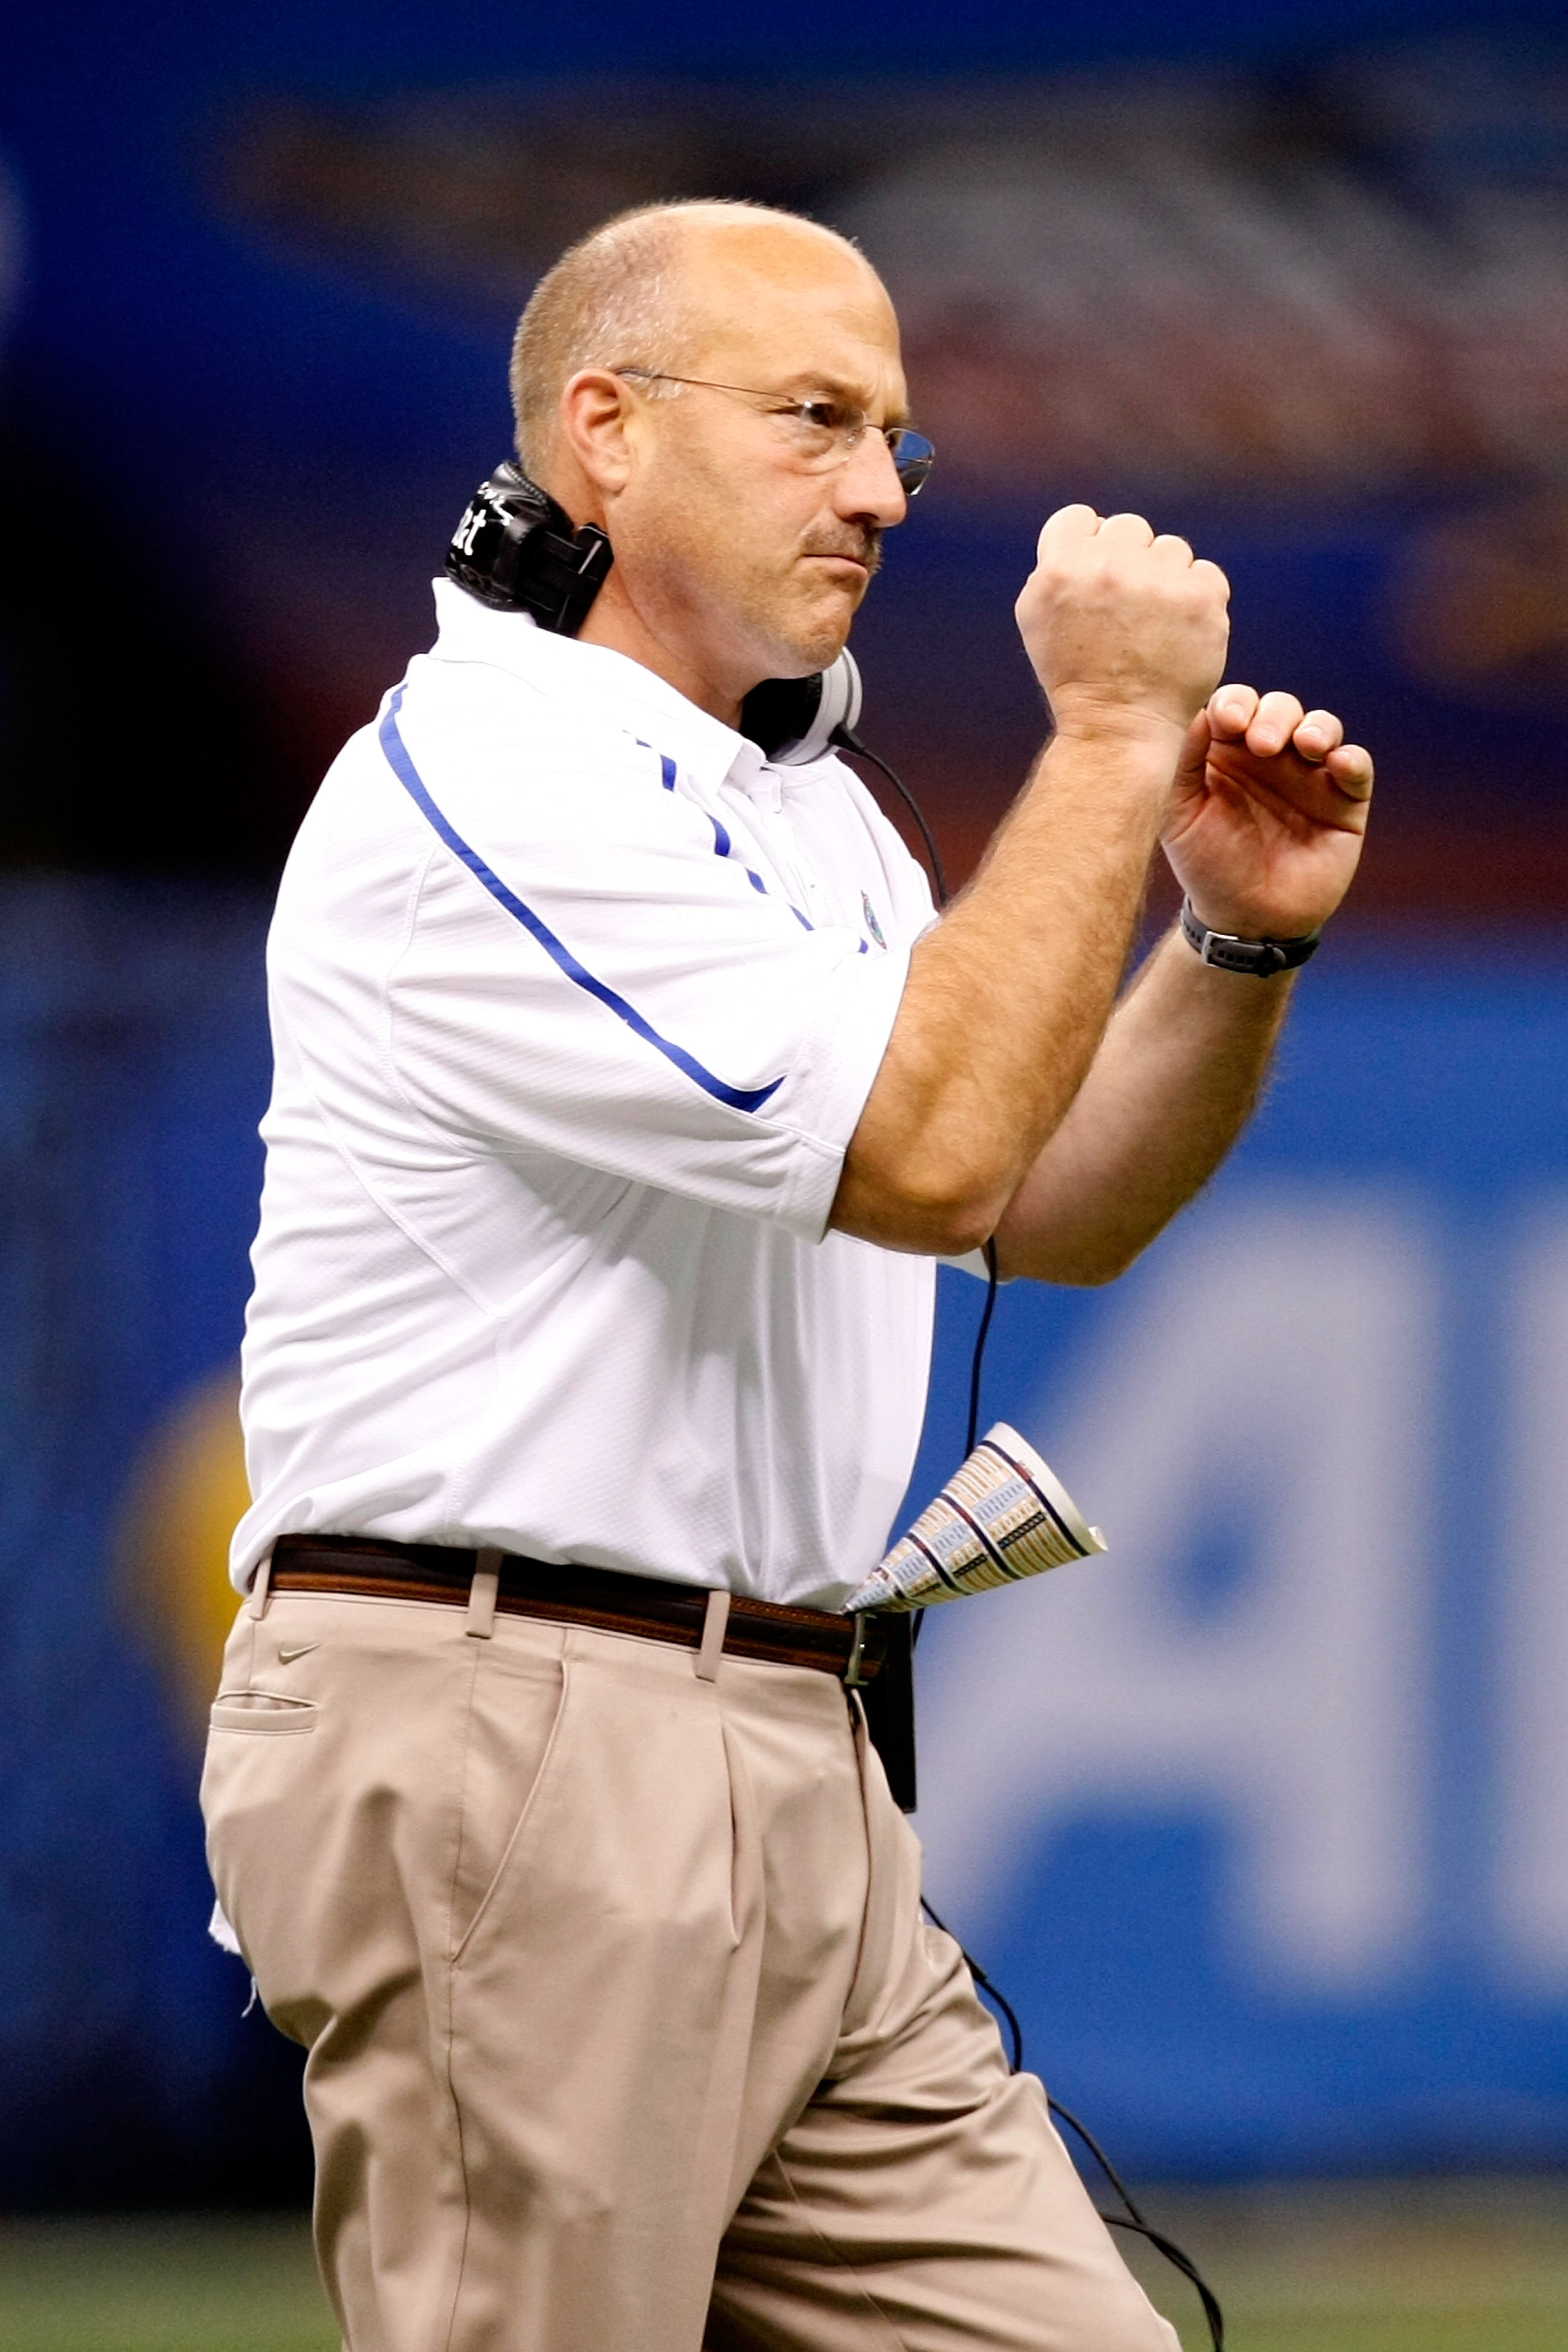 NEW ORLEANS - JANUARY 01:  Offensive coordinator and interim head coach Steve Addazio of the Florida Gators celebrates a touchdown from the sidelines during the Allstate Sugar Bowl against the Cincinnati Bearcats at the Louisana Superdome on January 1, 20